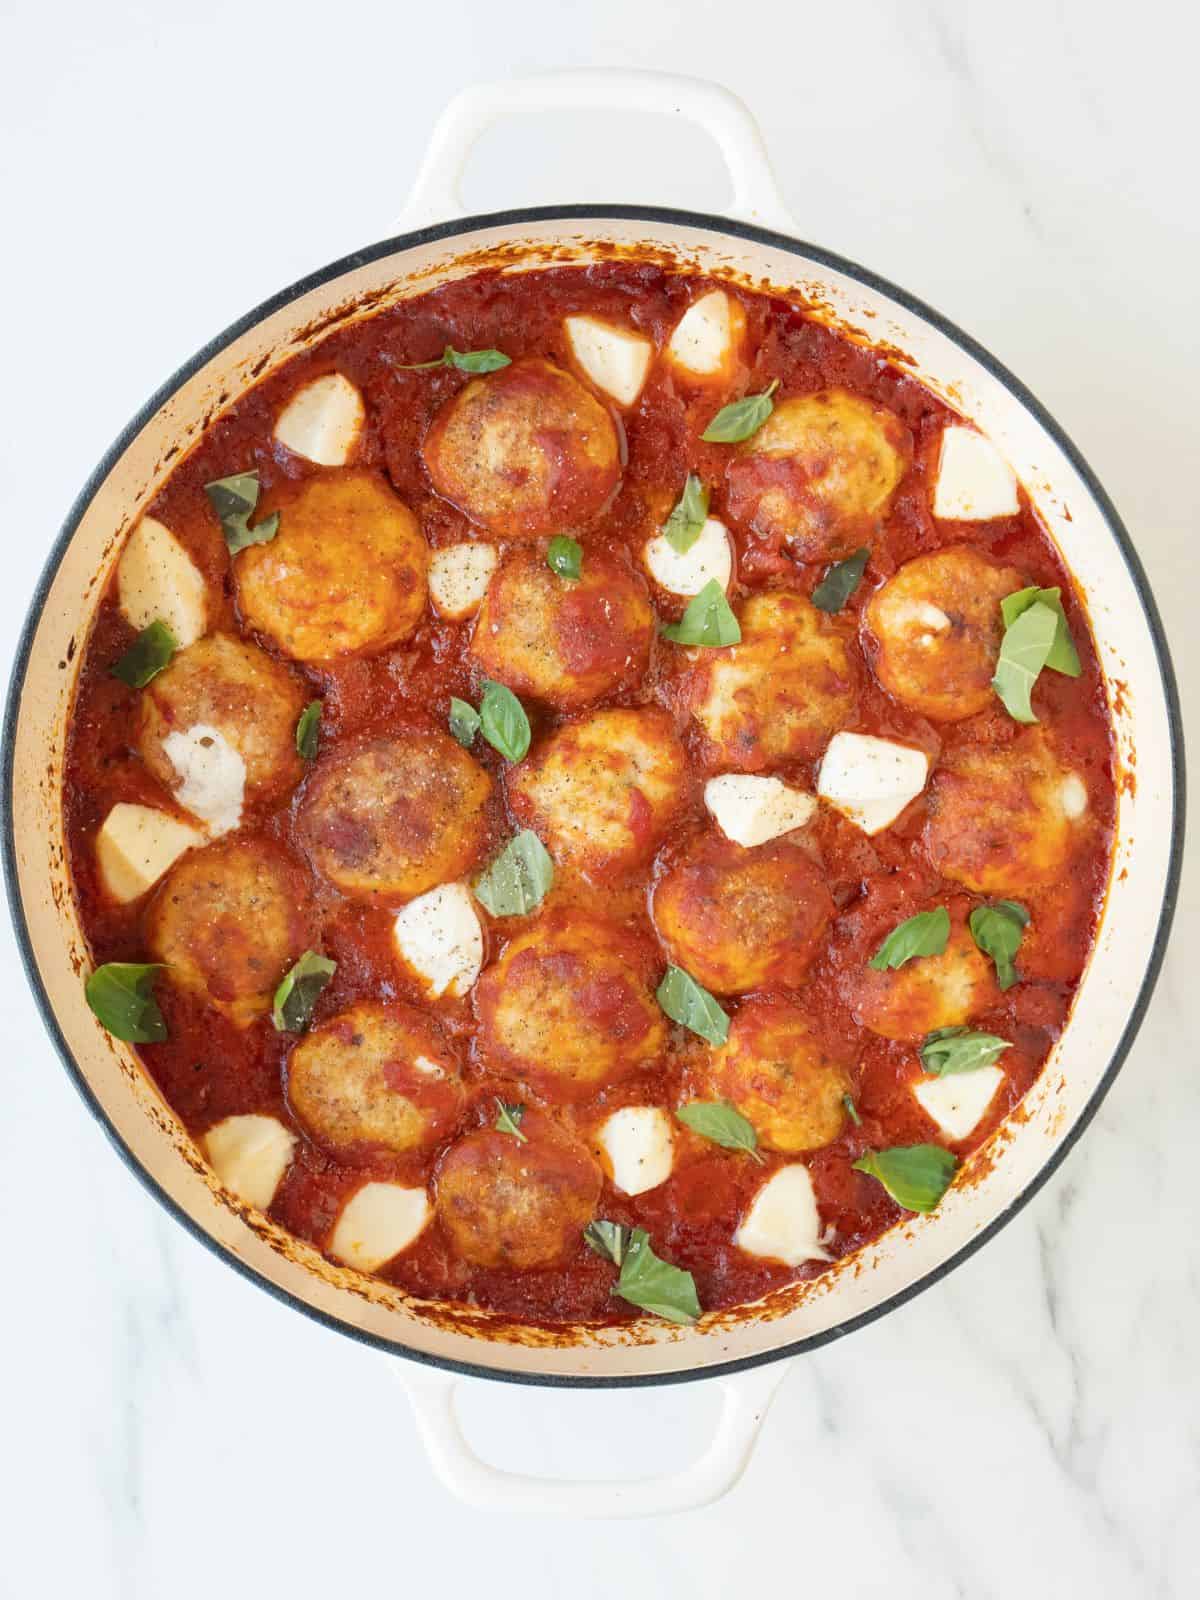 A white dutch oven with chicken parm meatballs being cooked in tomato sauce garnished with pieces of bocconcini and basil leaves.